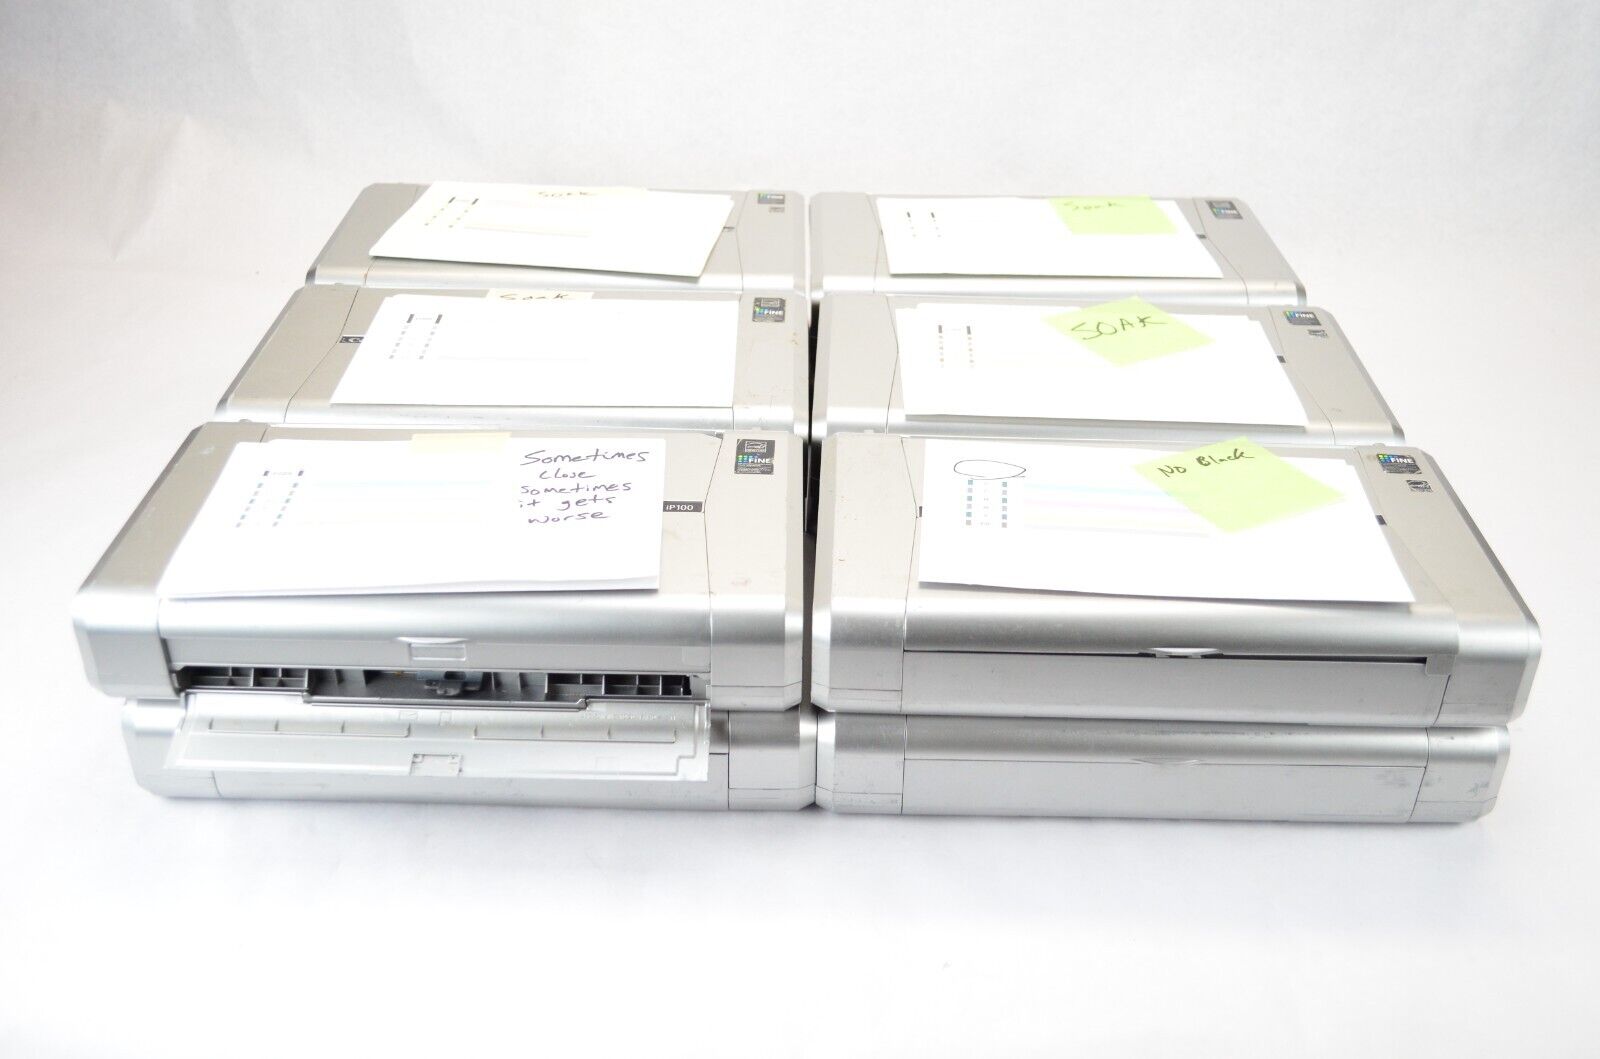 Lot of 12 Canon PIXMA iP100 Inkjet Mobile Photo Printer For Parts Various issues